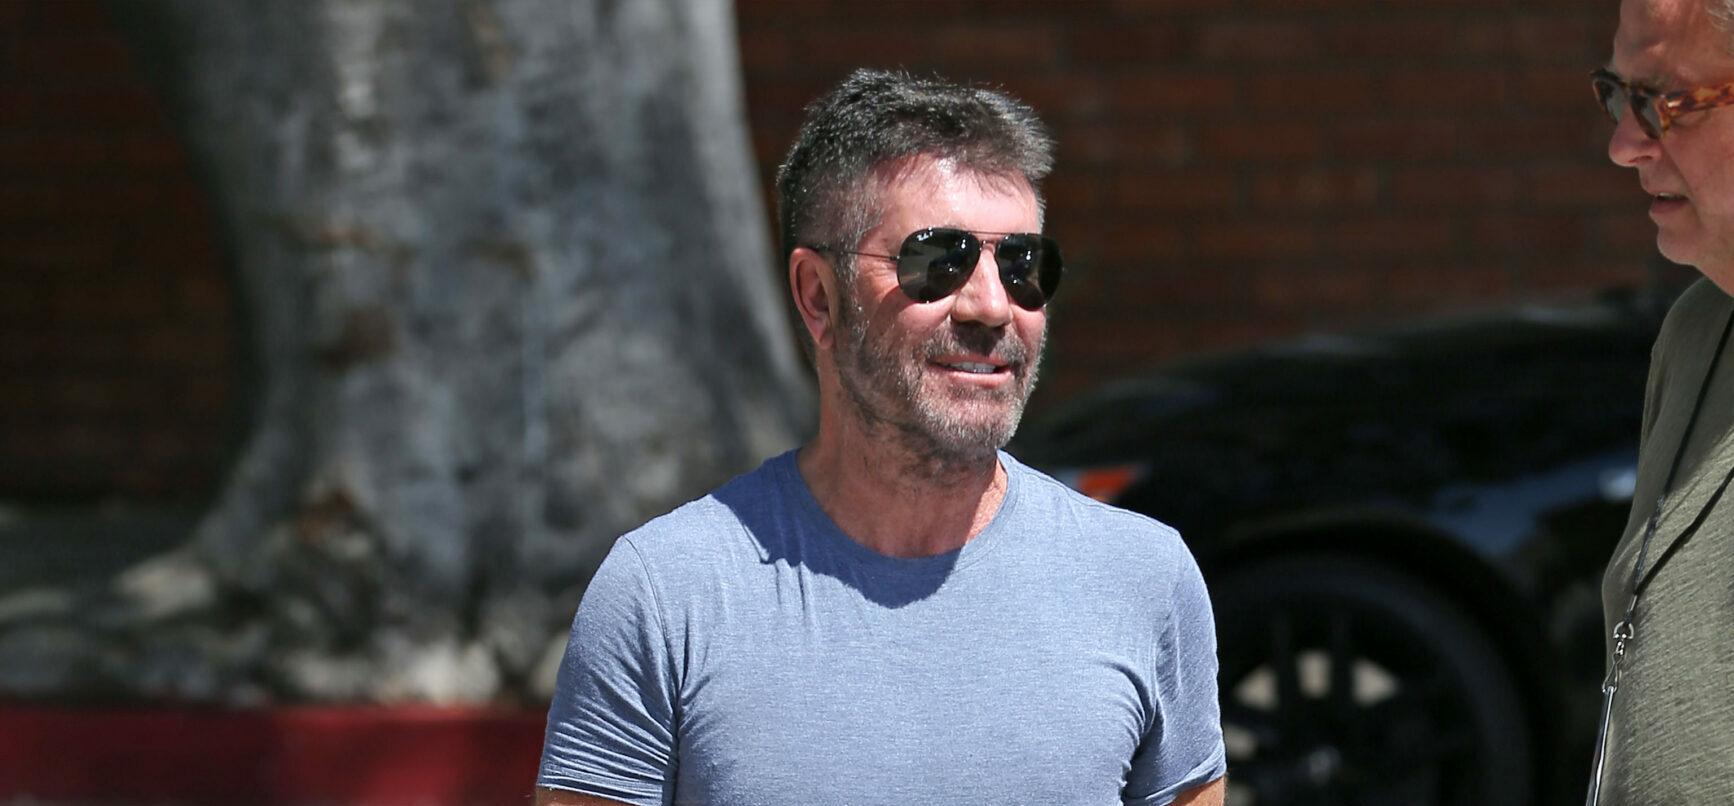 Simon Cowell is seen arriving at the apos America apos s got talent apos filming in los Angeles